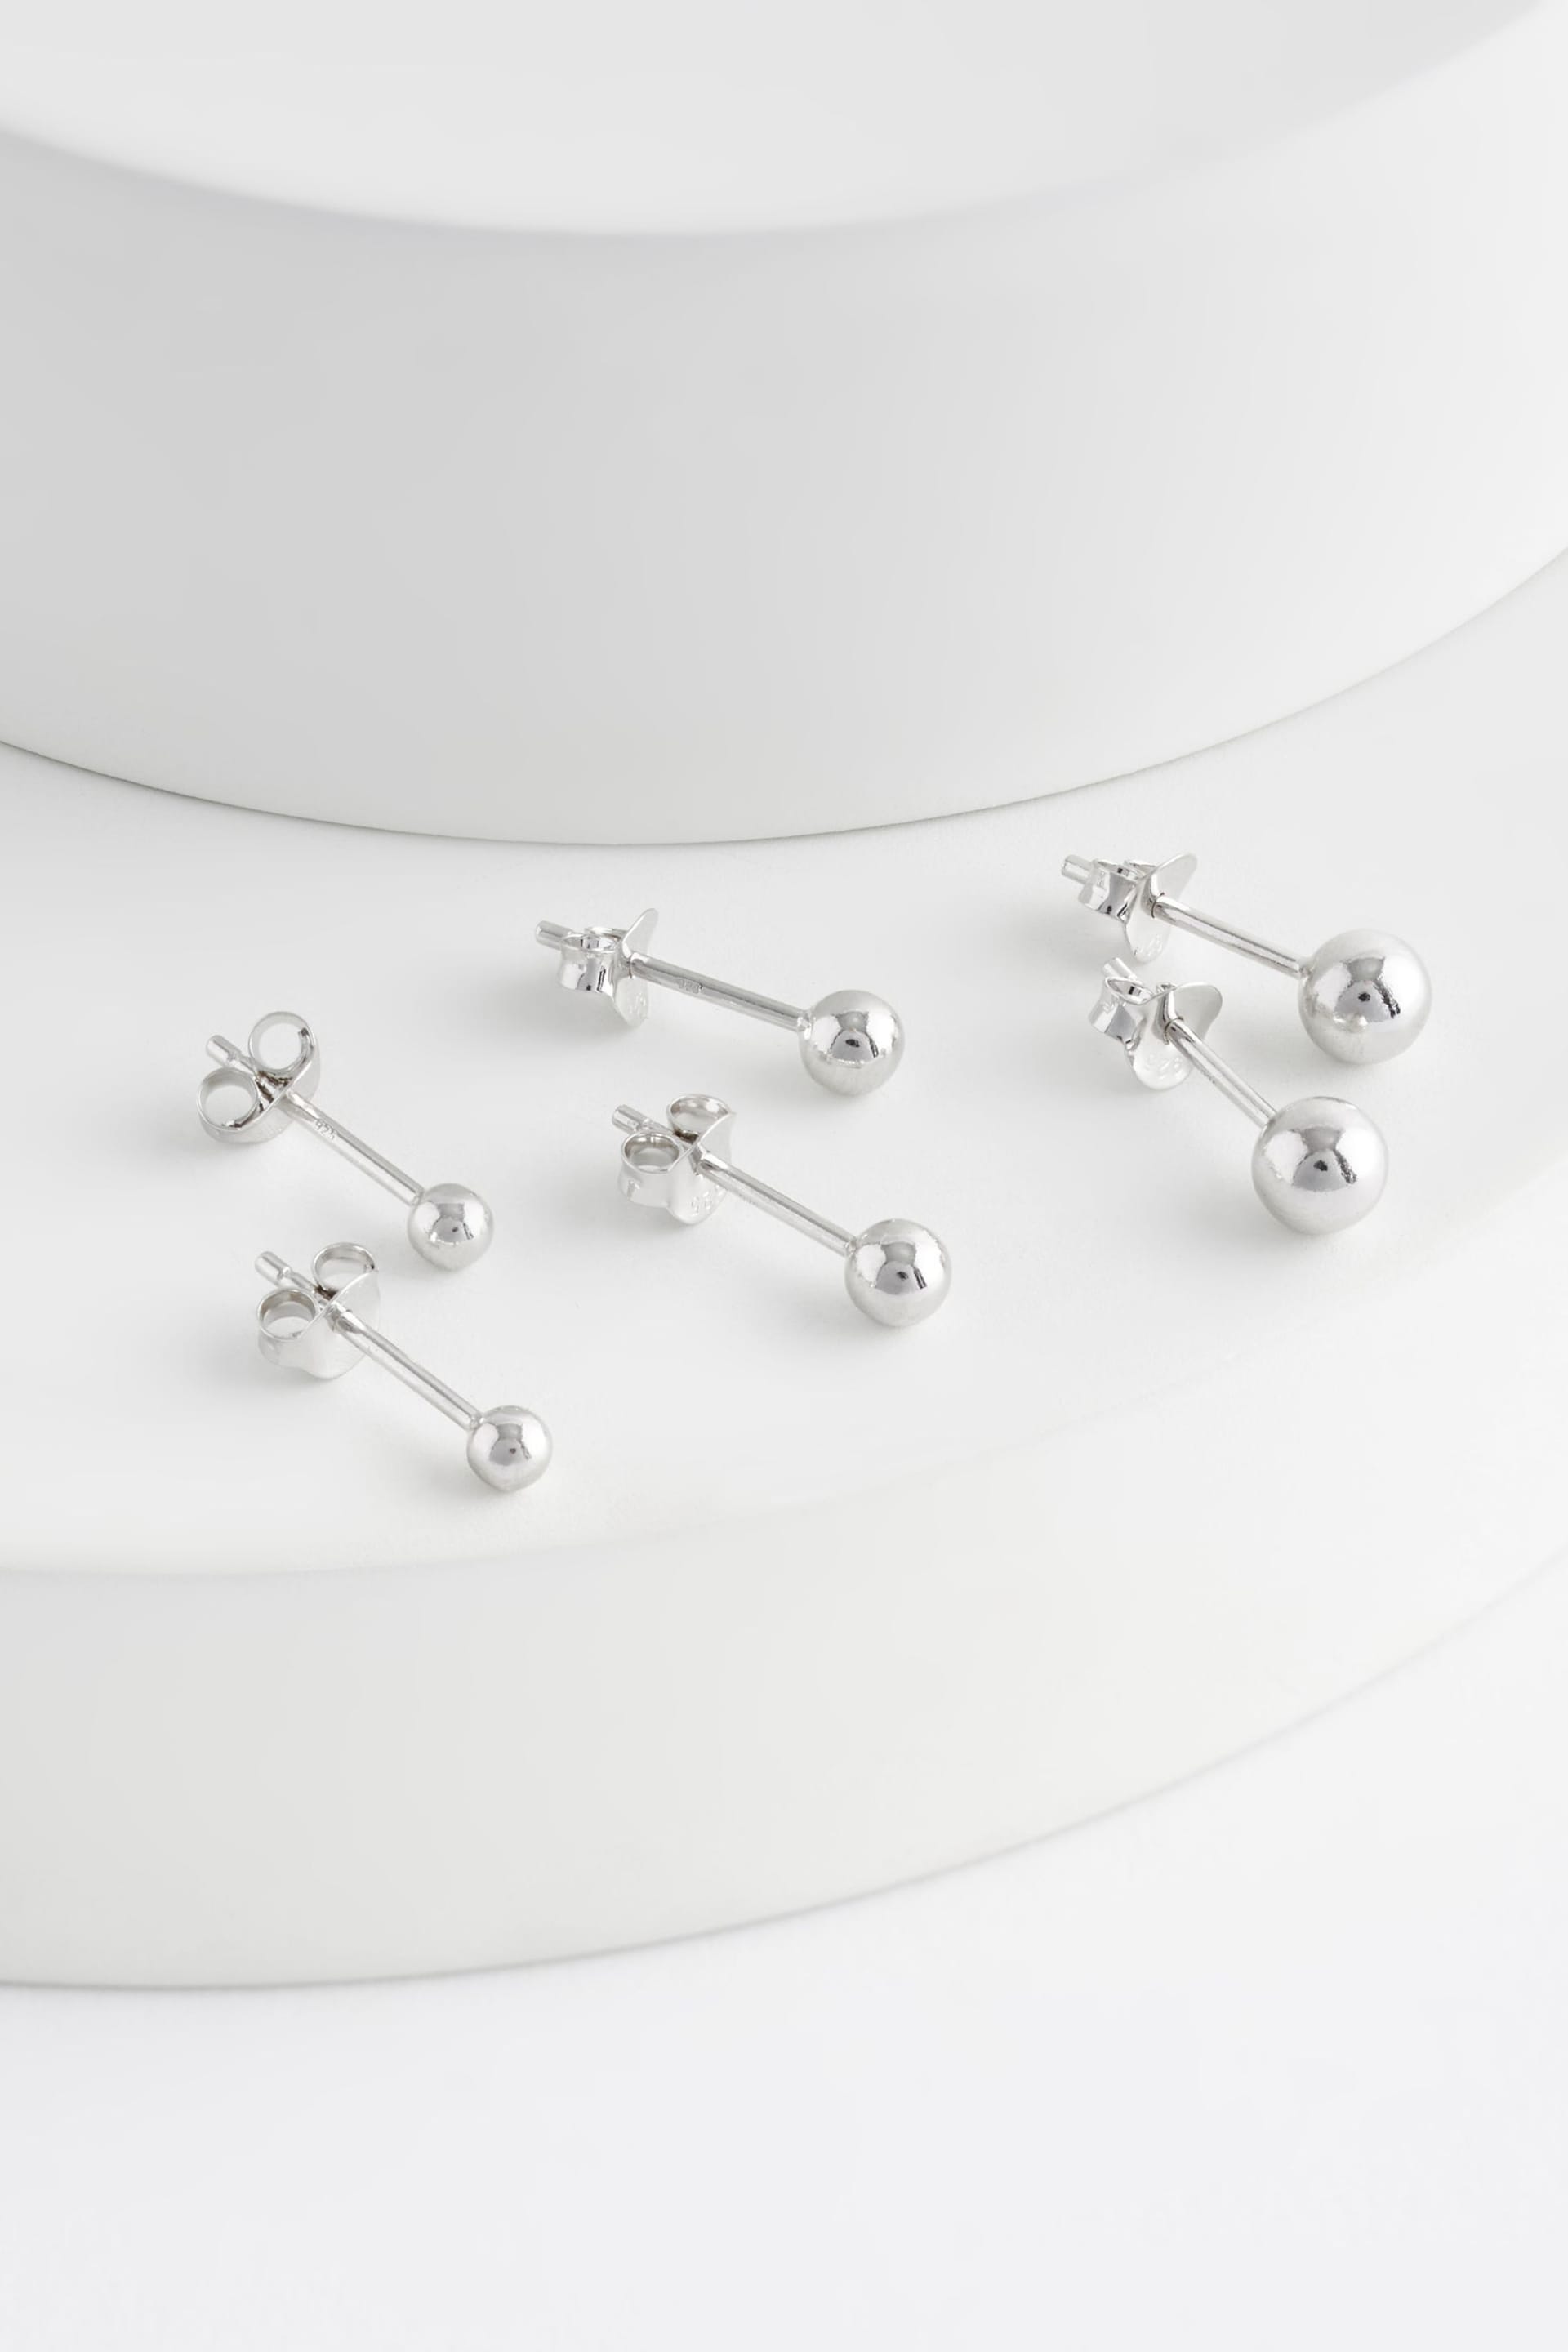 Sterling Silver Graduated Ball Stud Earrings 3 Pack - Image 2 of 2